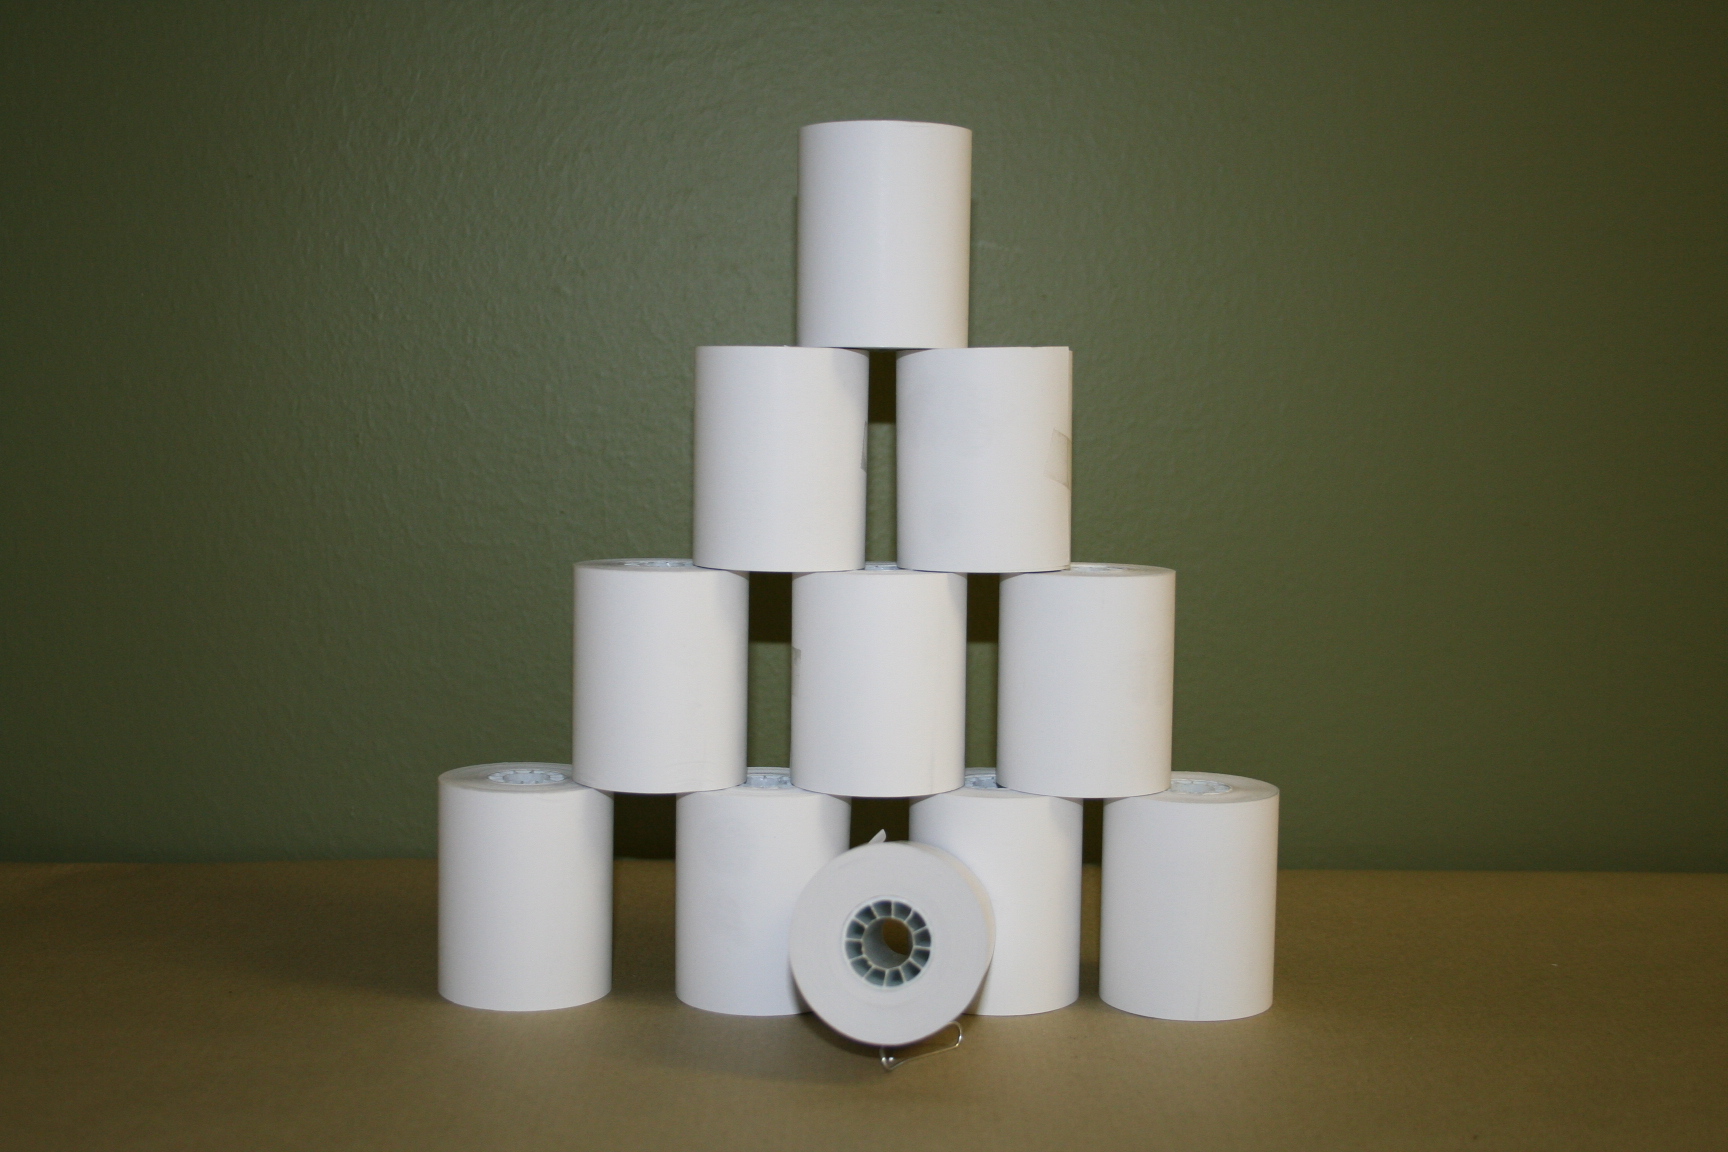 2 1/4” x 50’ BPA Free Thermal Credit Card Rolls-Zone #1 - Click Image to Close